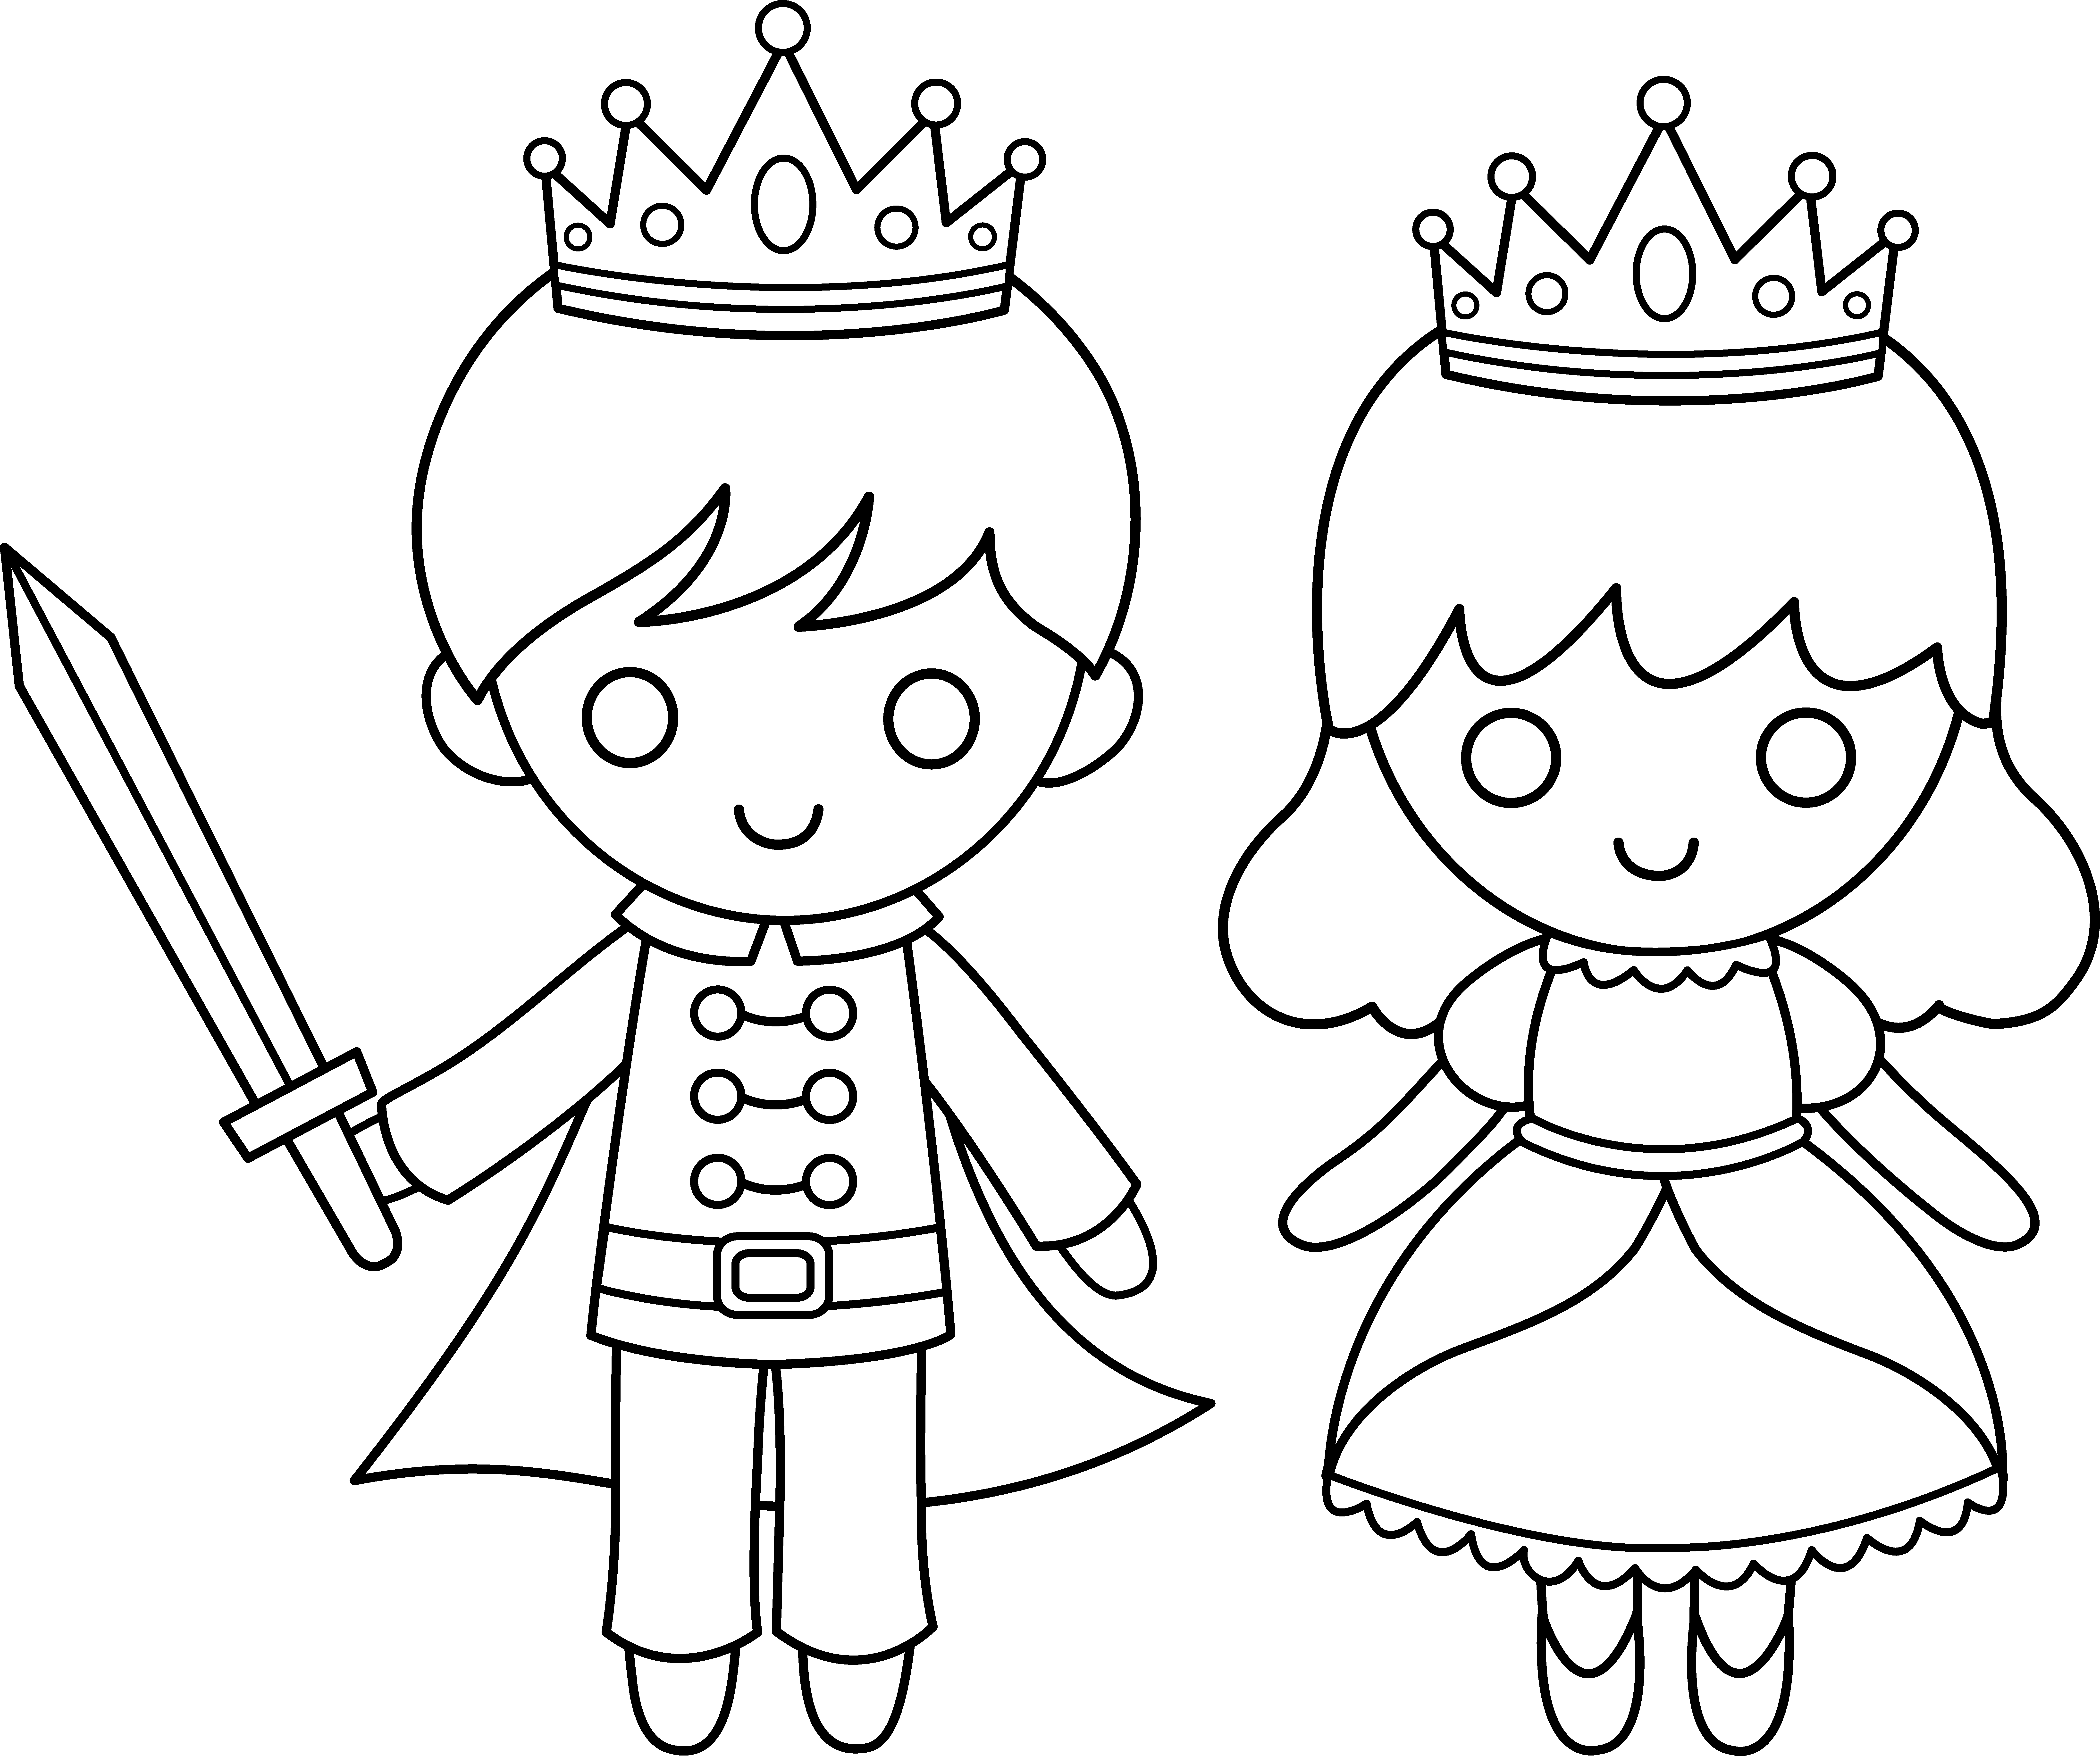 6 Pics of Prince Crown Coloring Pages - Crown Clip Art Coloring ...